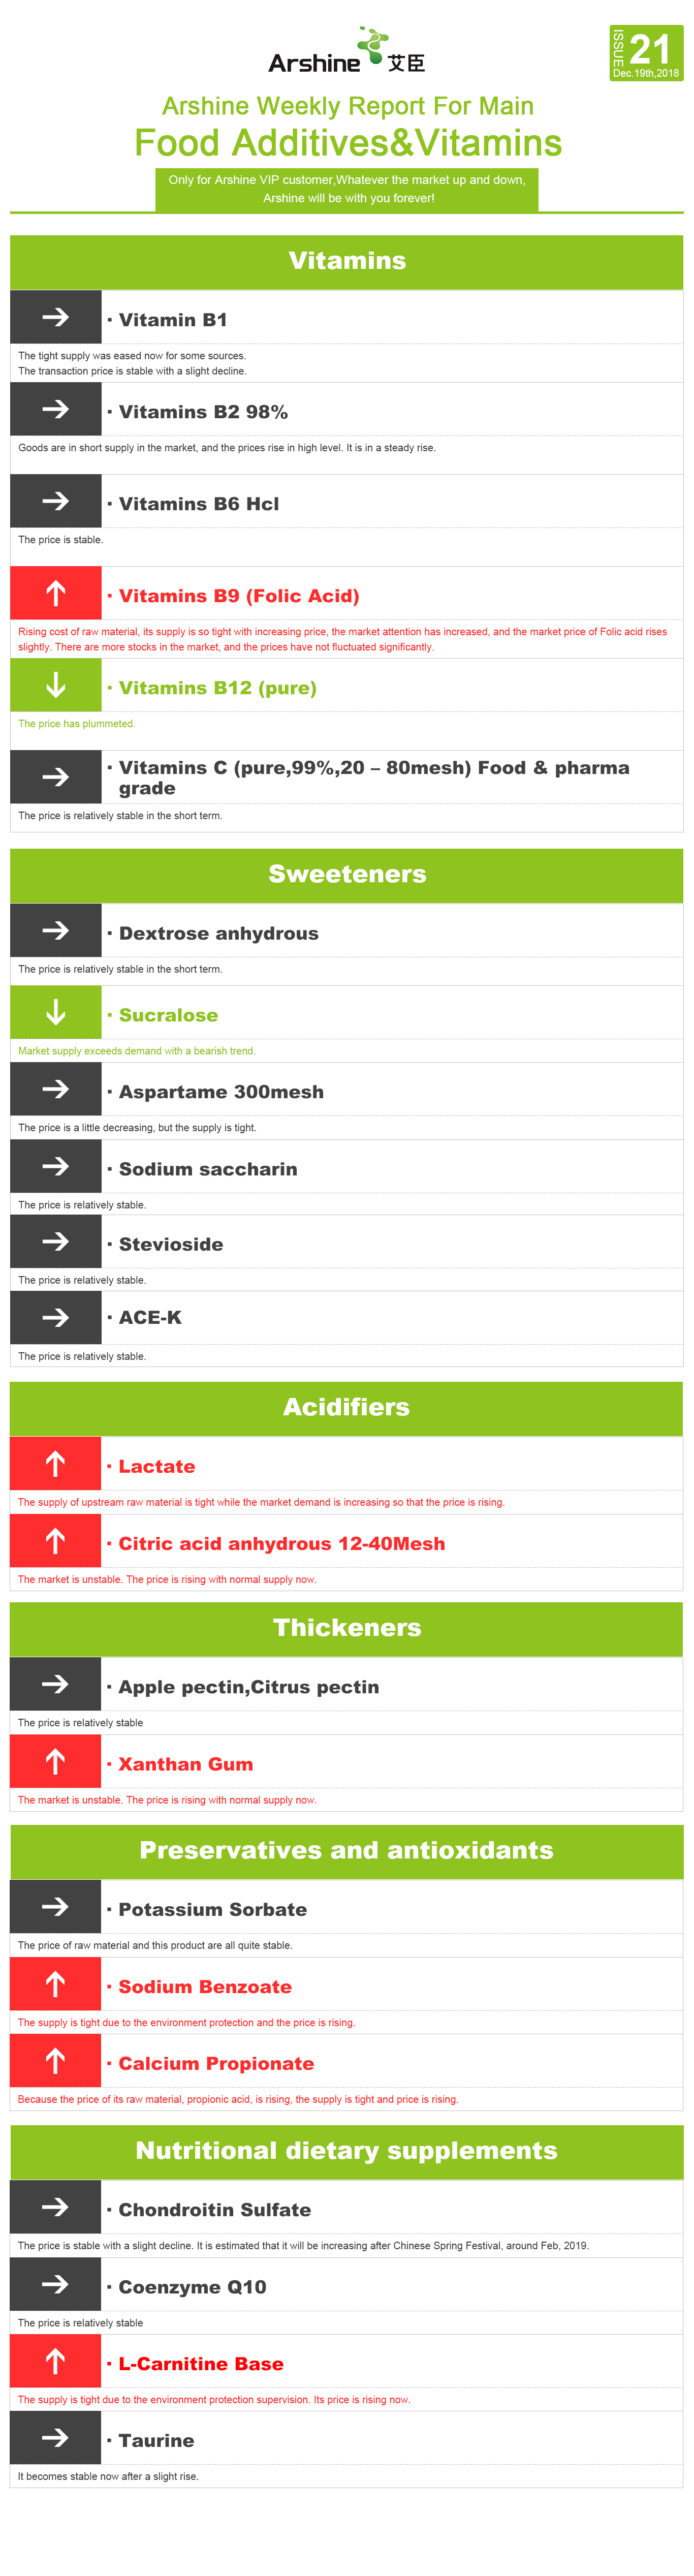 Arshine weekly report for main food additives & Vitamins.jpg